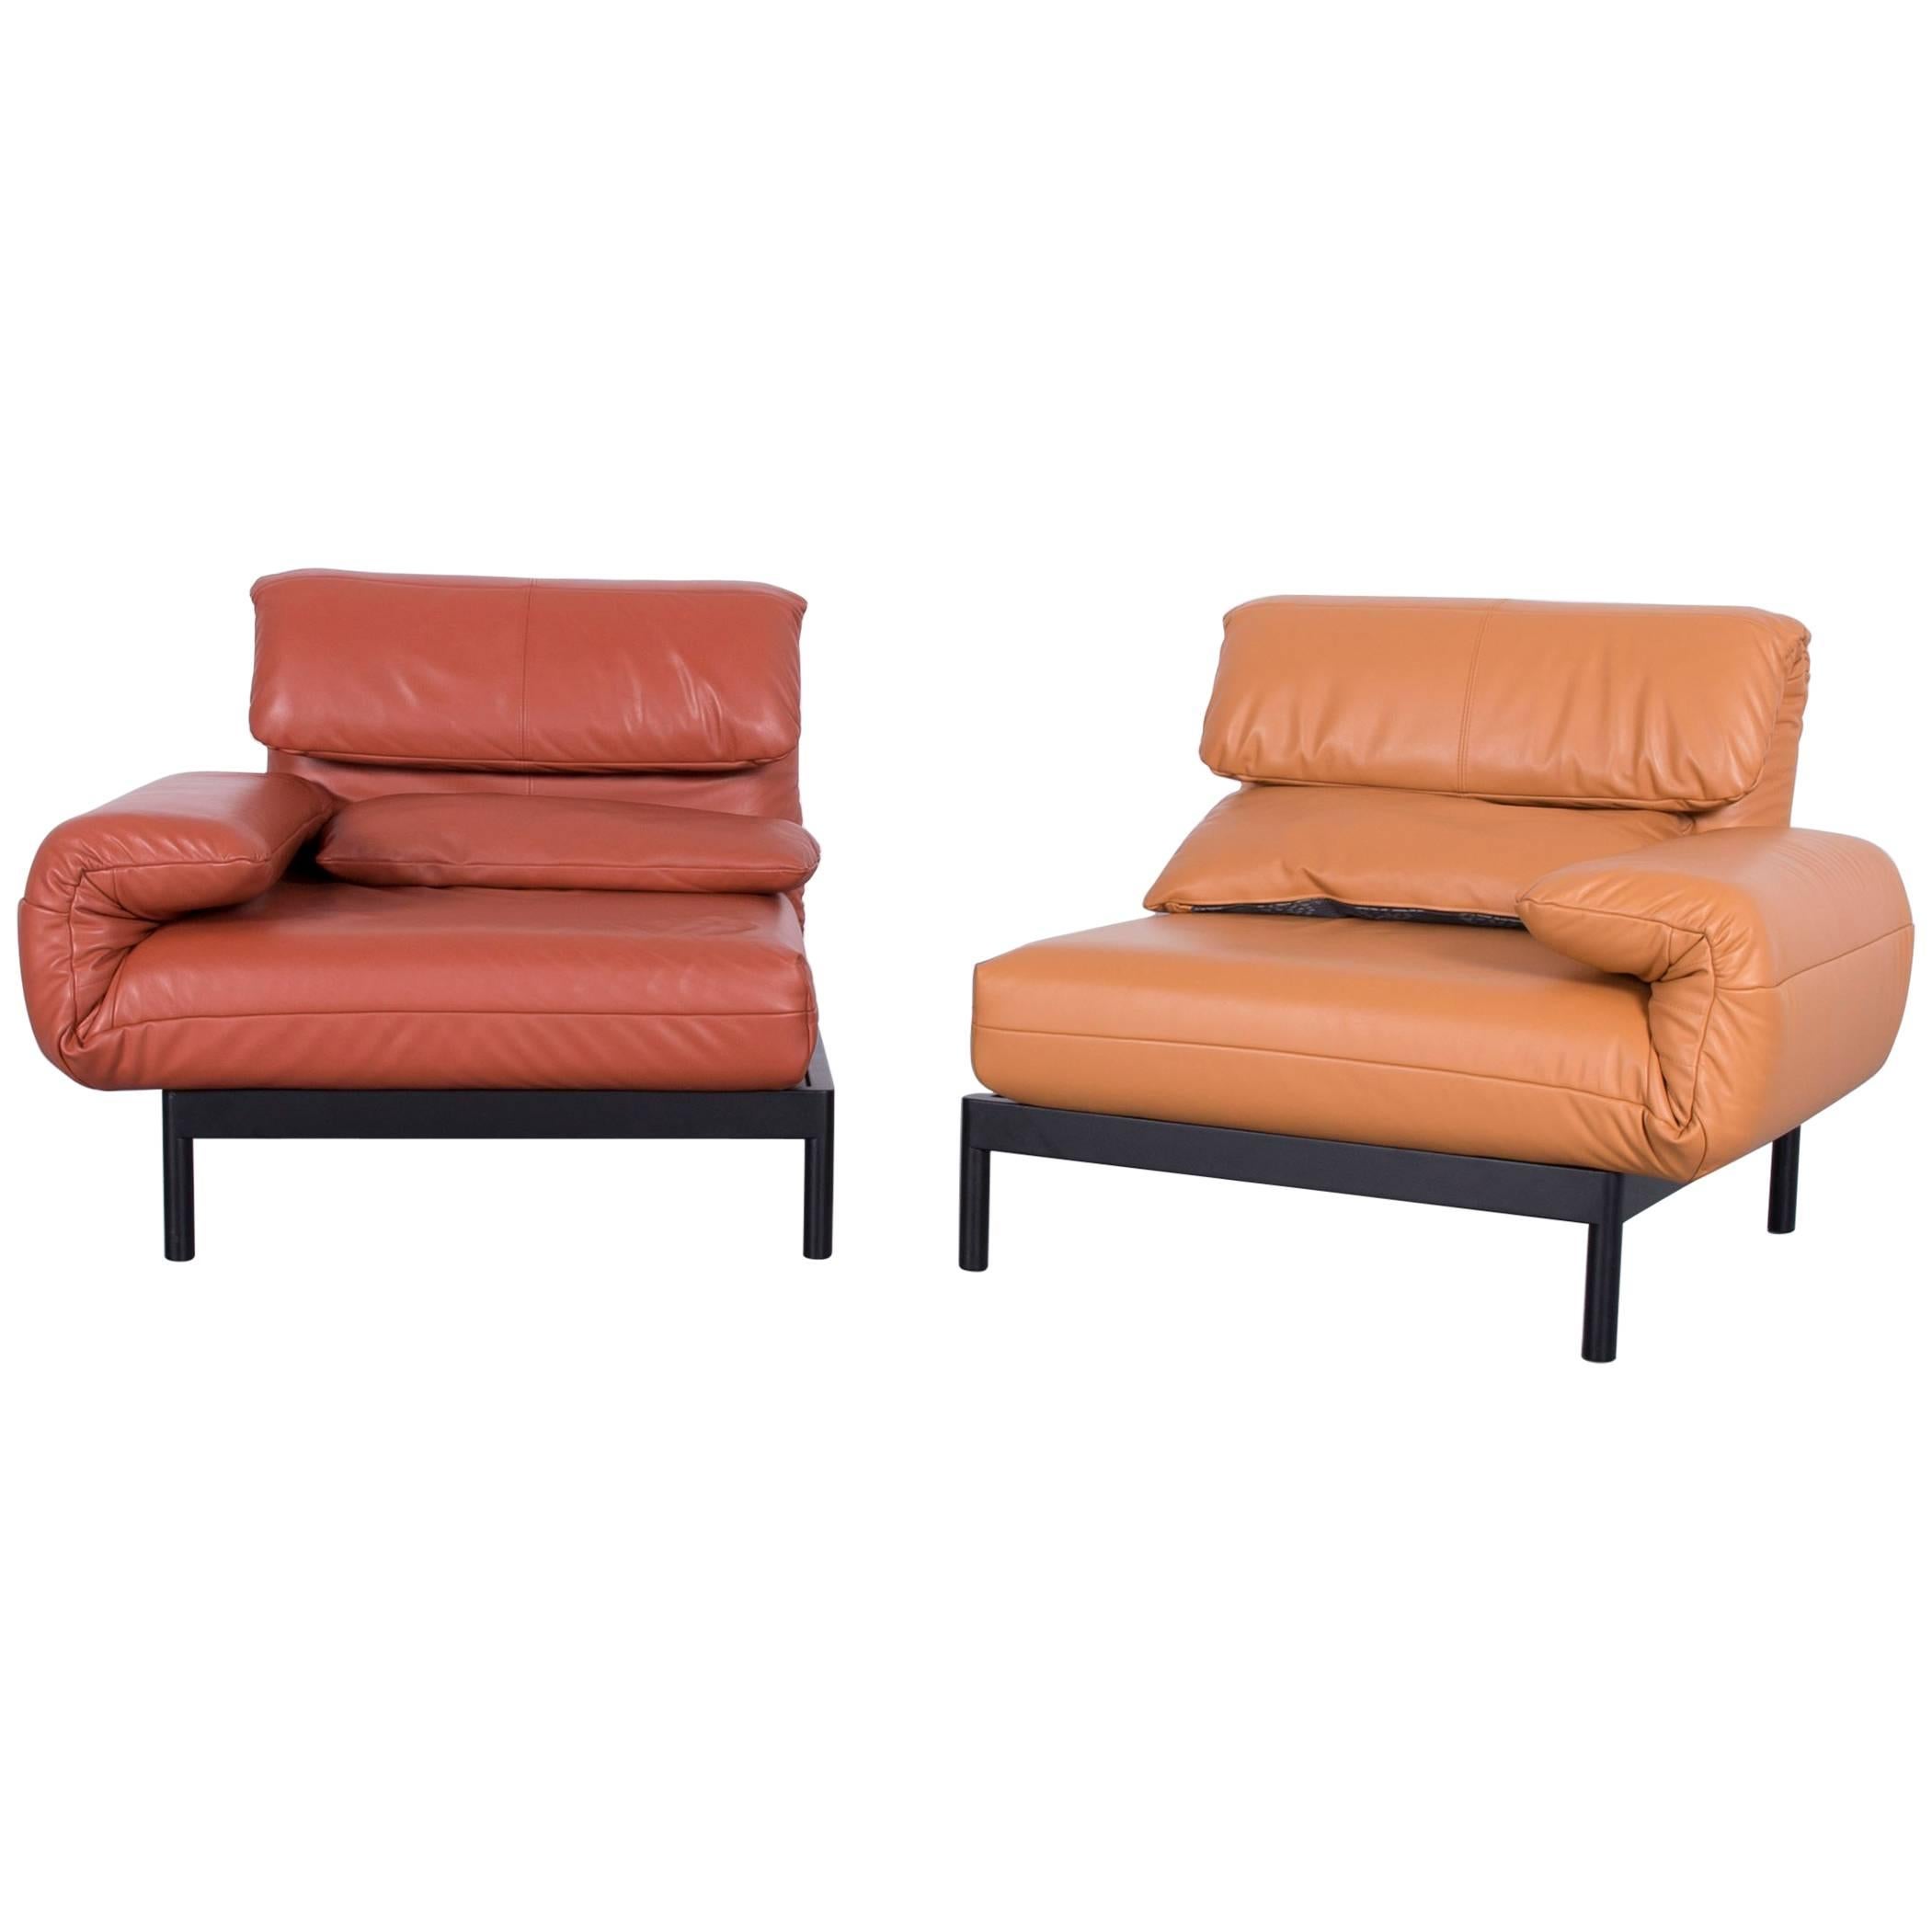 Rolf Benz Plura Designer Sofa Leather Orange Yellow Red Armchairs For Sale